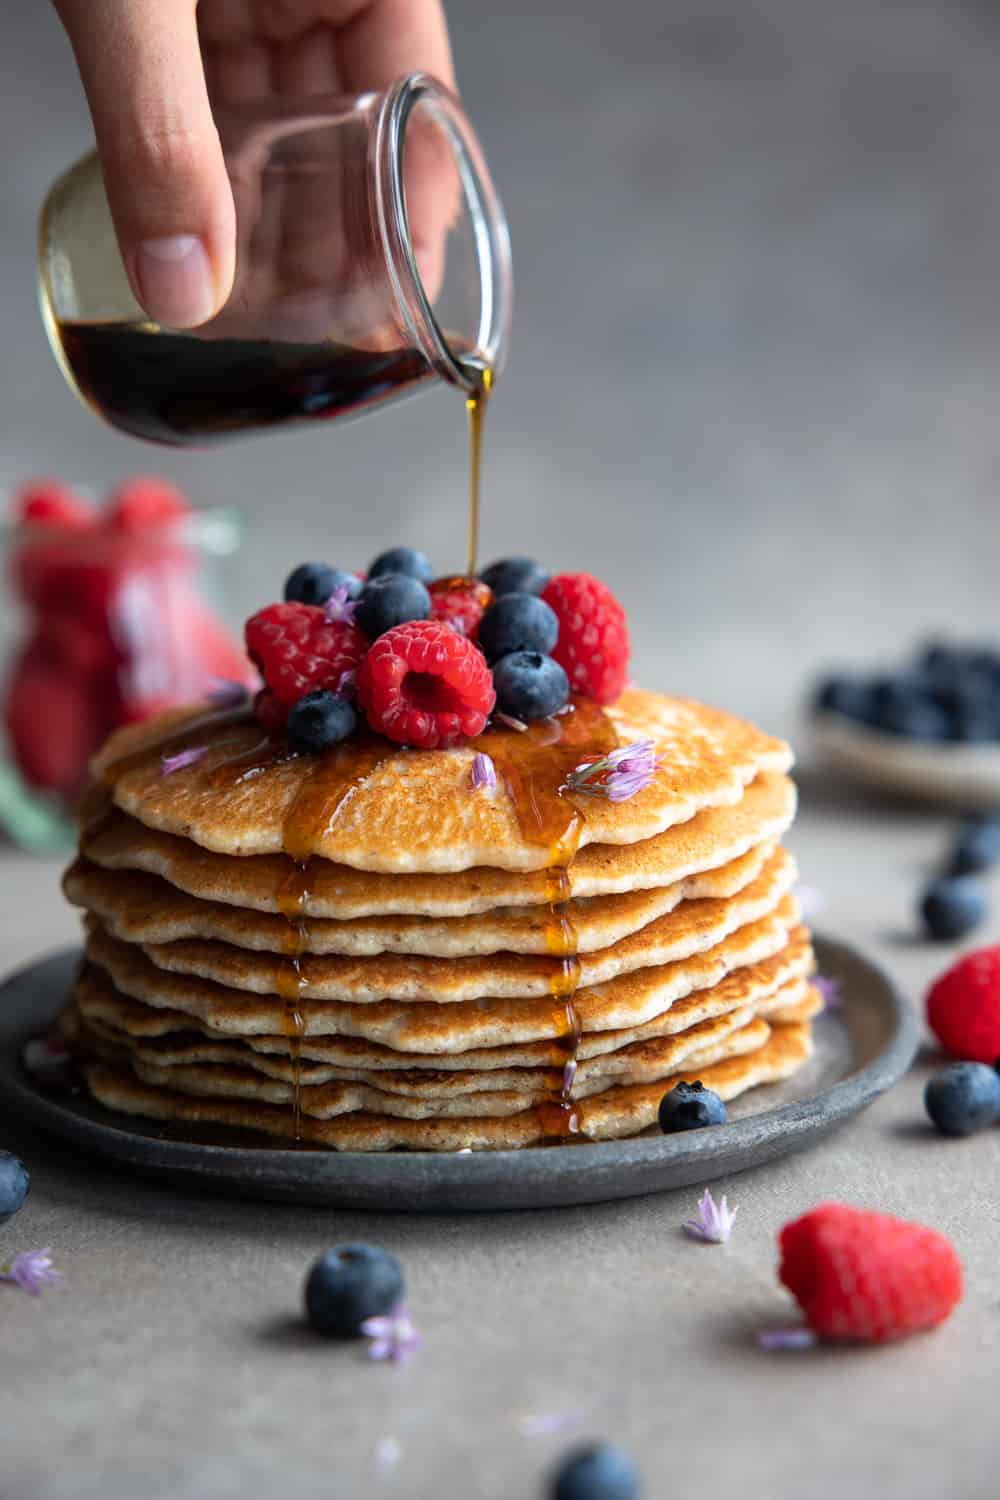 Drizzling maple syrup over the stack of pancakes.